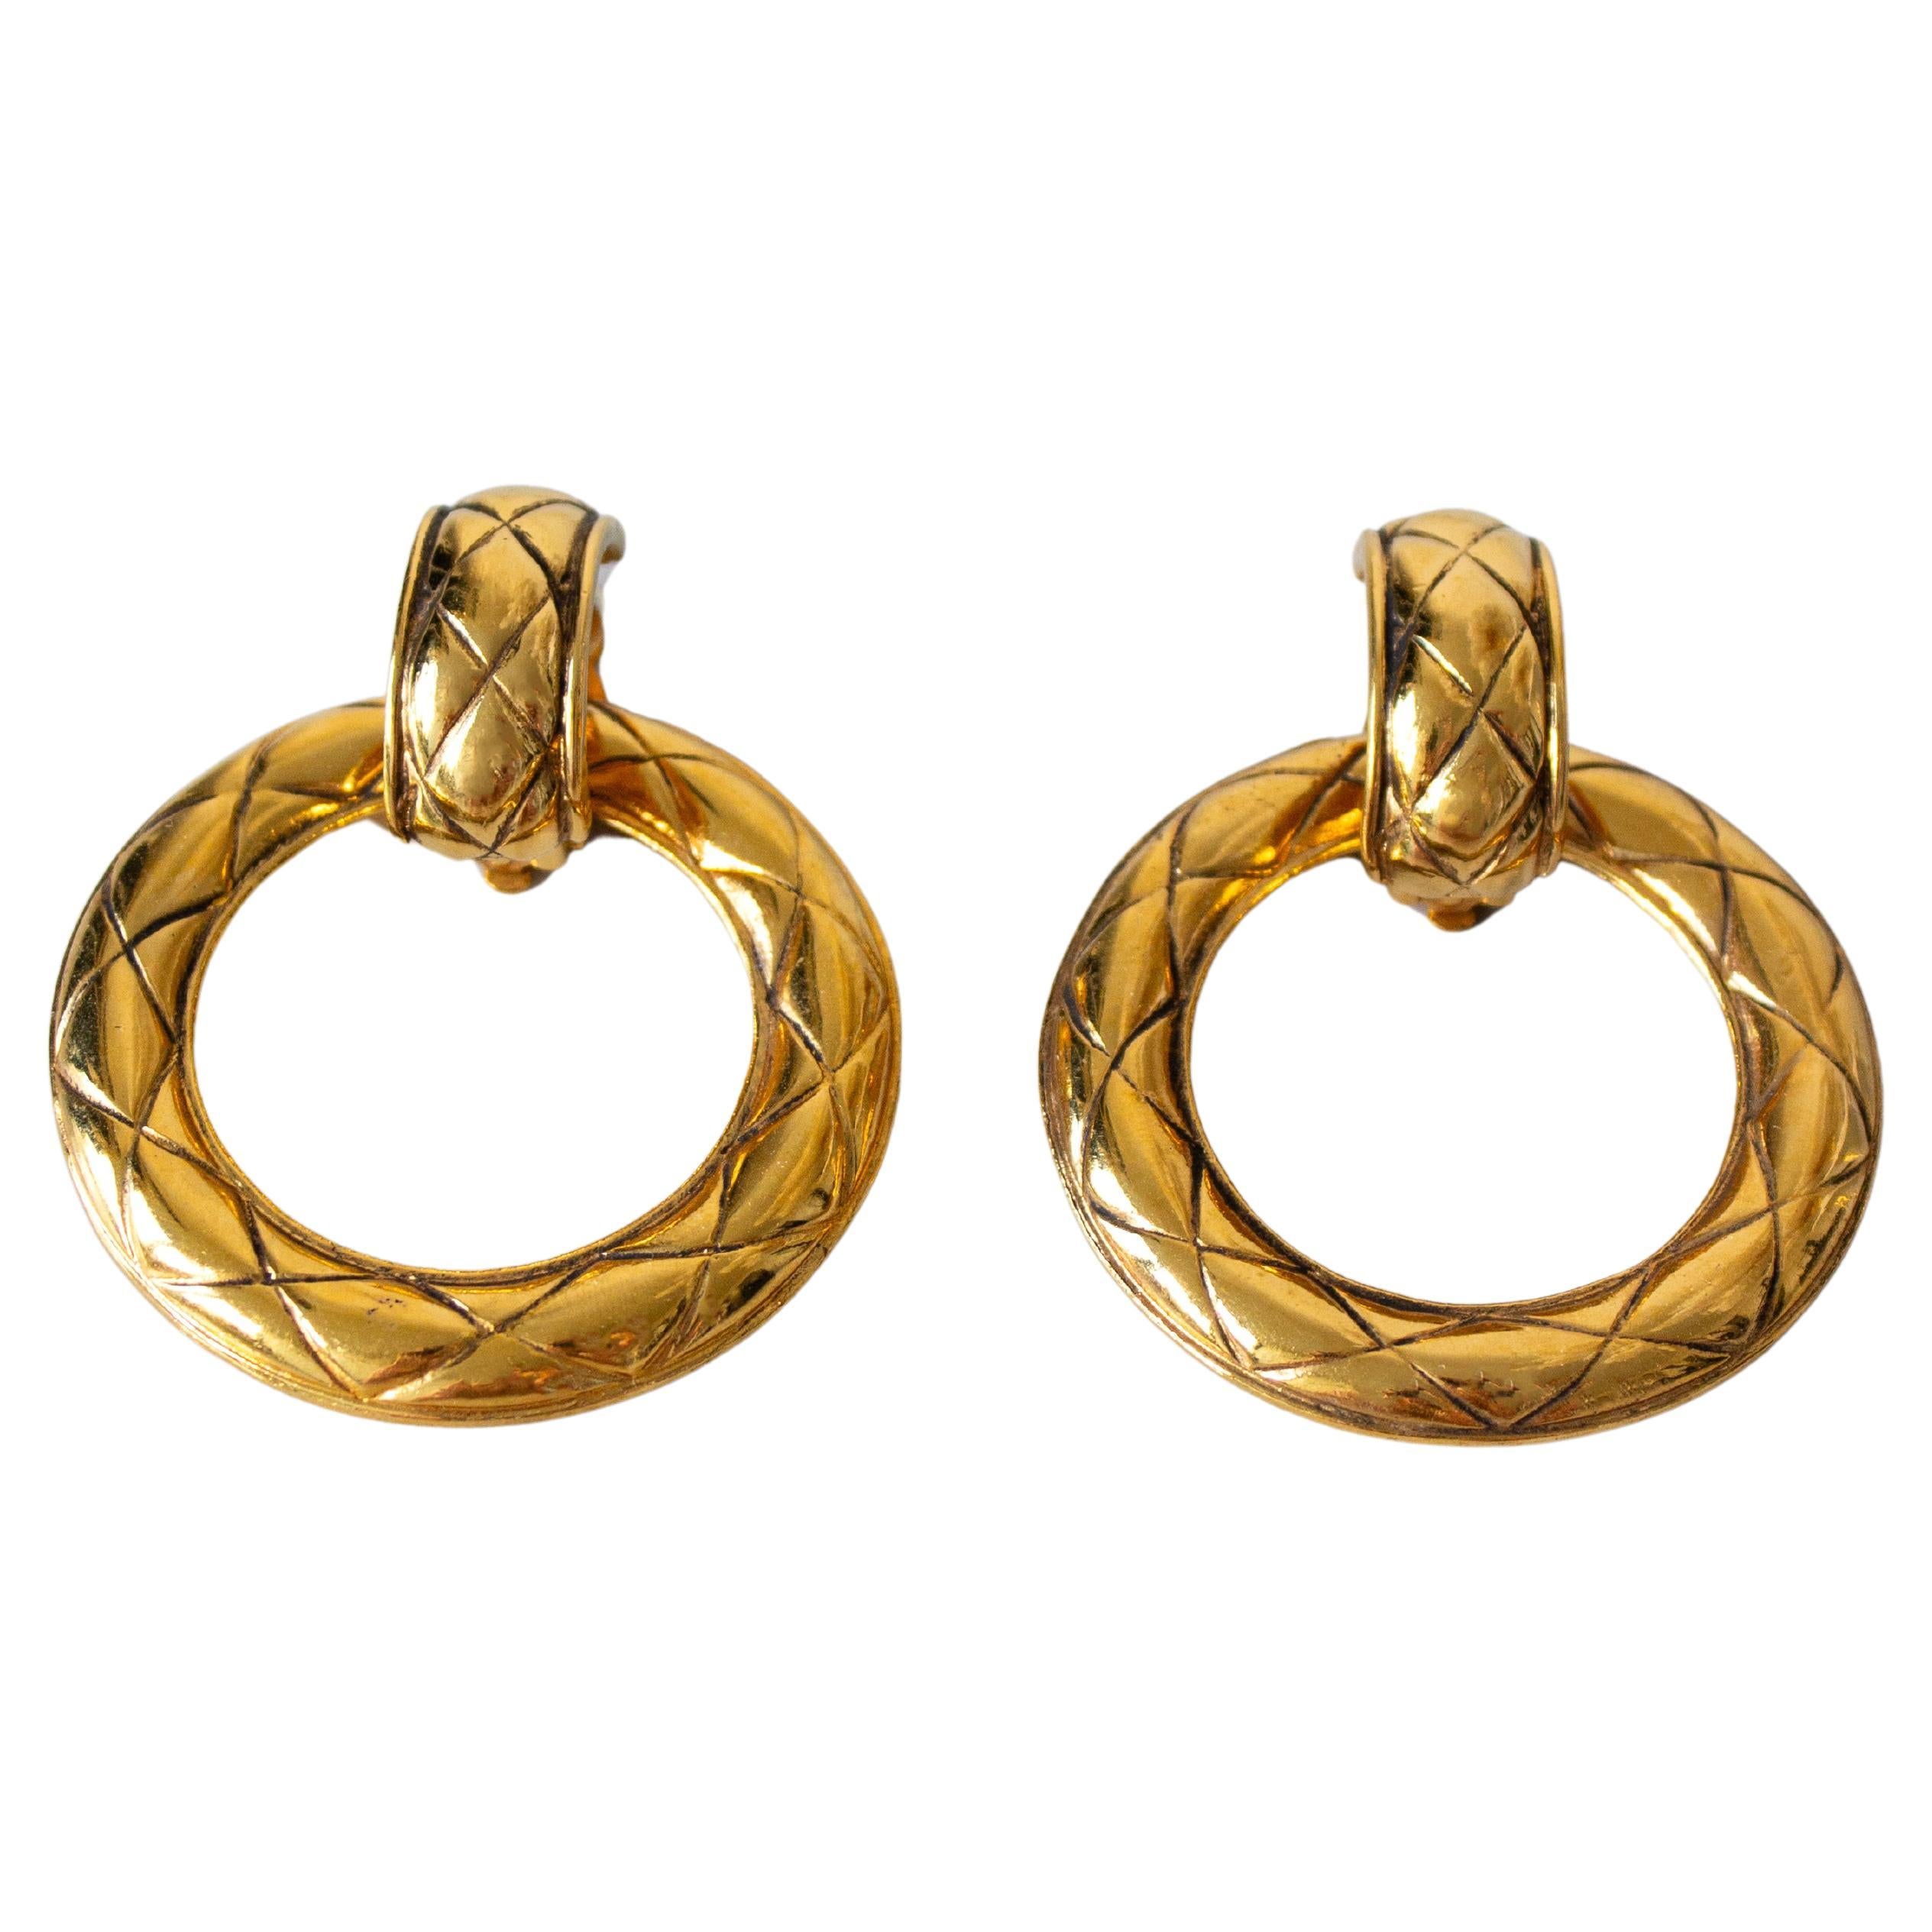 Chanel Vintage 1980s Gold Plated Door Knocker Quilted Hoop Clip On Earrings